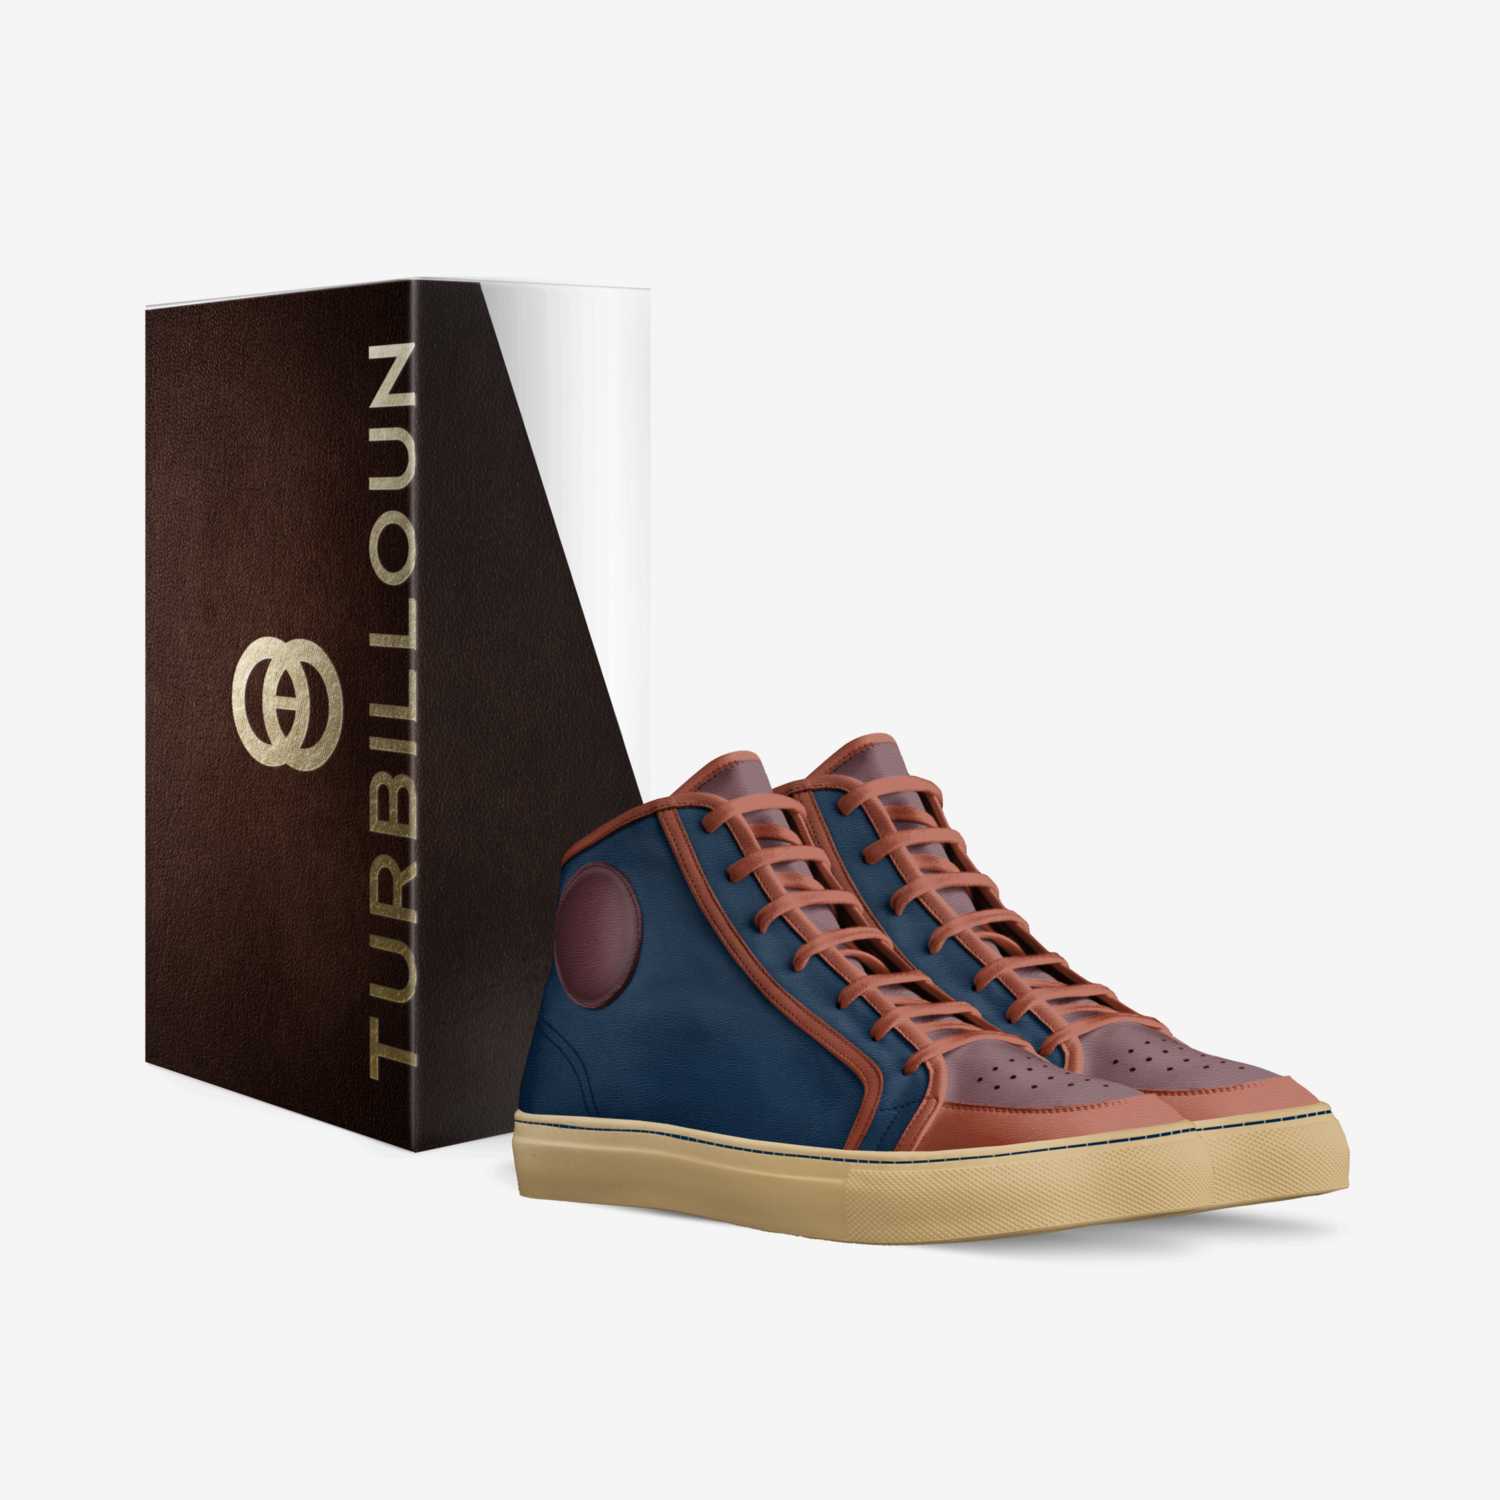 Tellurian Classic custom made in Italy shoes by Calrissian Whitaker | Box view